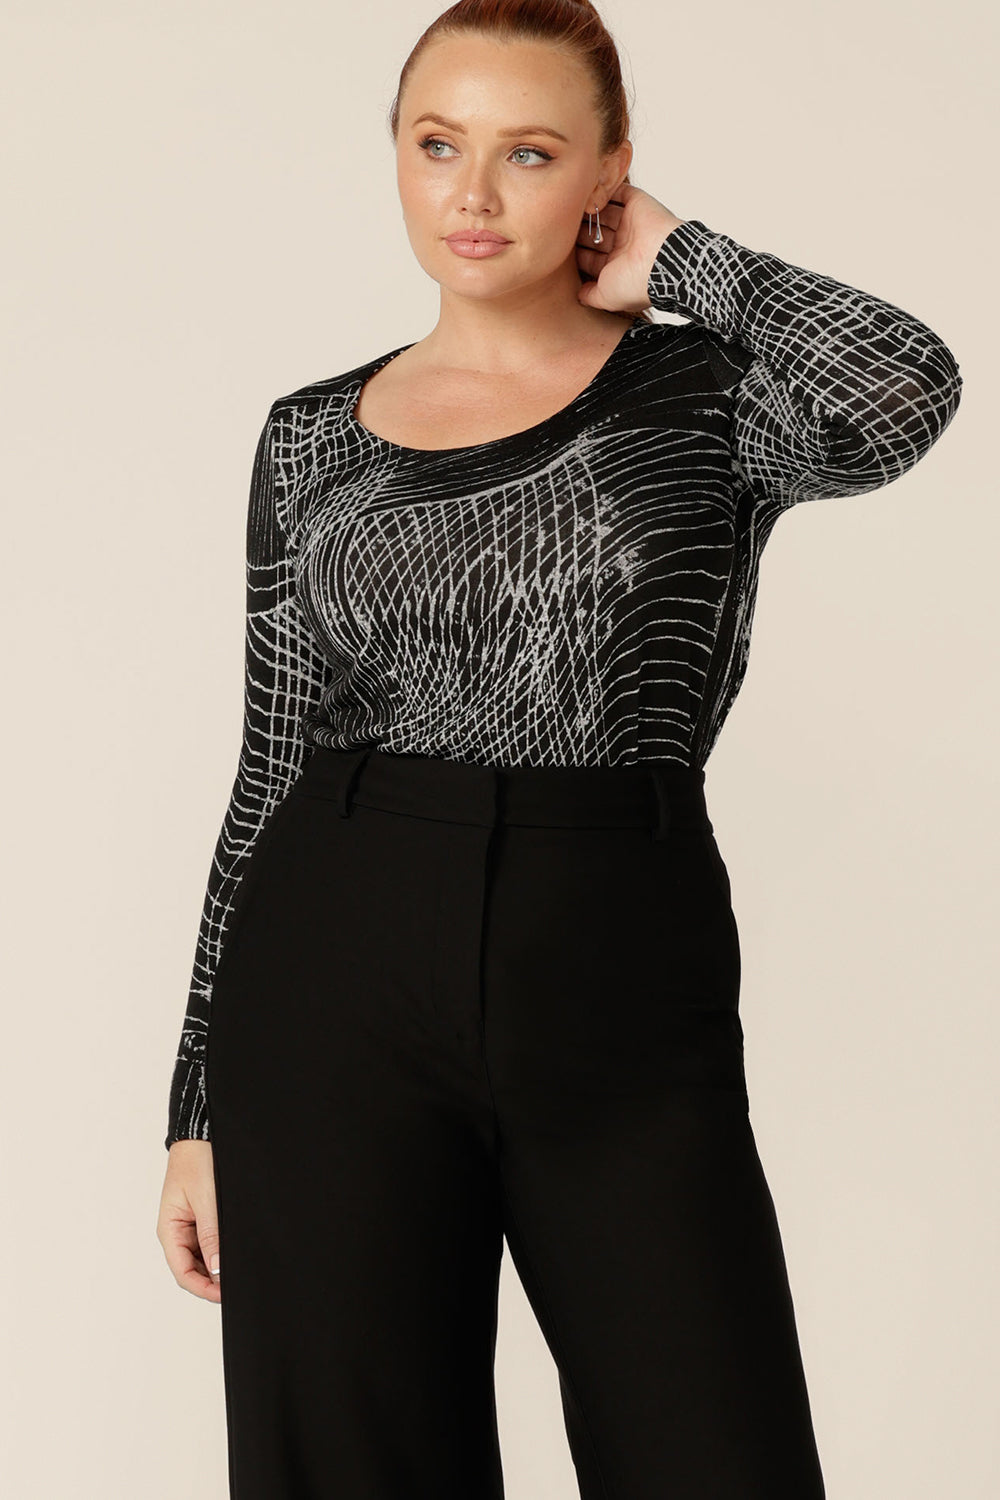 A curvy woman wears a long sleeve, round neck top in size 12. This is the Leith Top by Australian and New Zealand women's clothing label, L&F, ad is worn with a high waisted, black pants. A good top for work and weekend wear, tailored details enhance this top's black and white patterned, textured knit fabric.